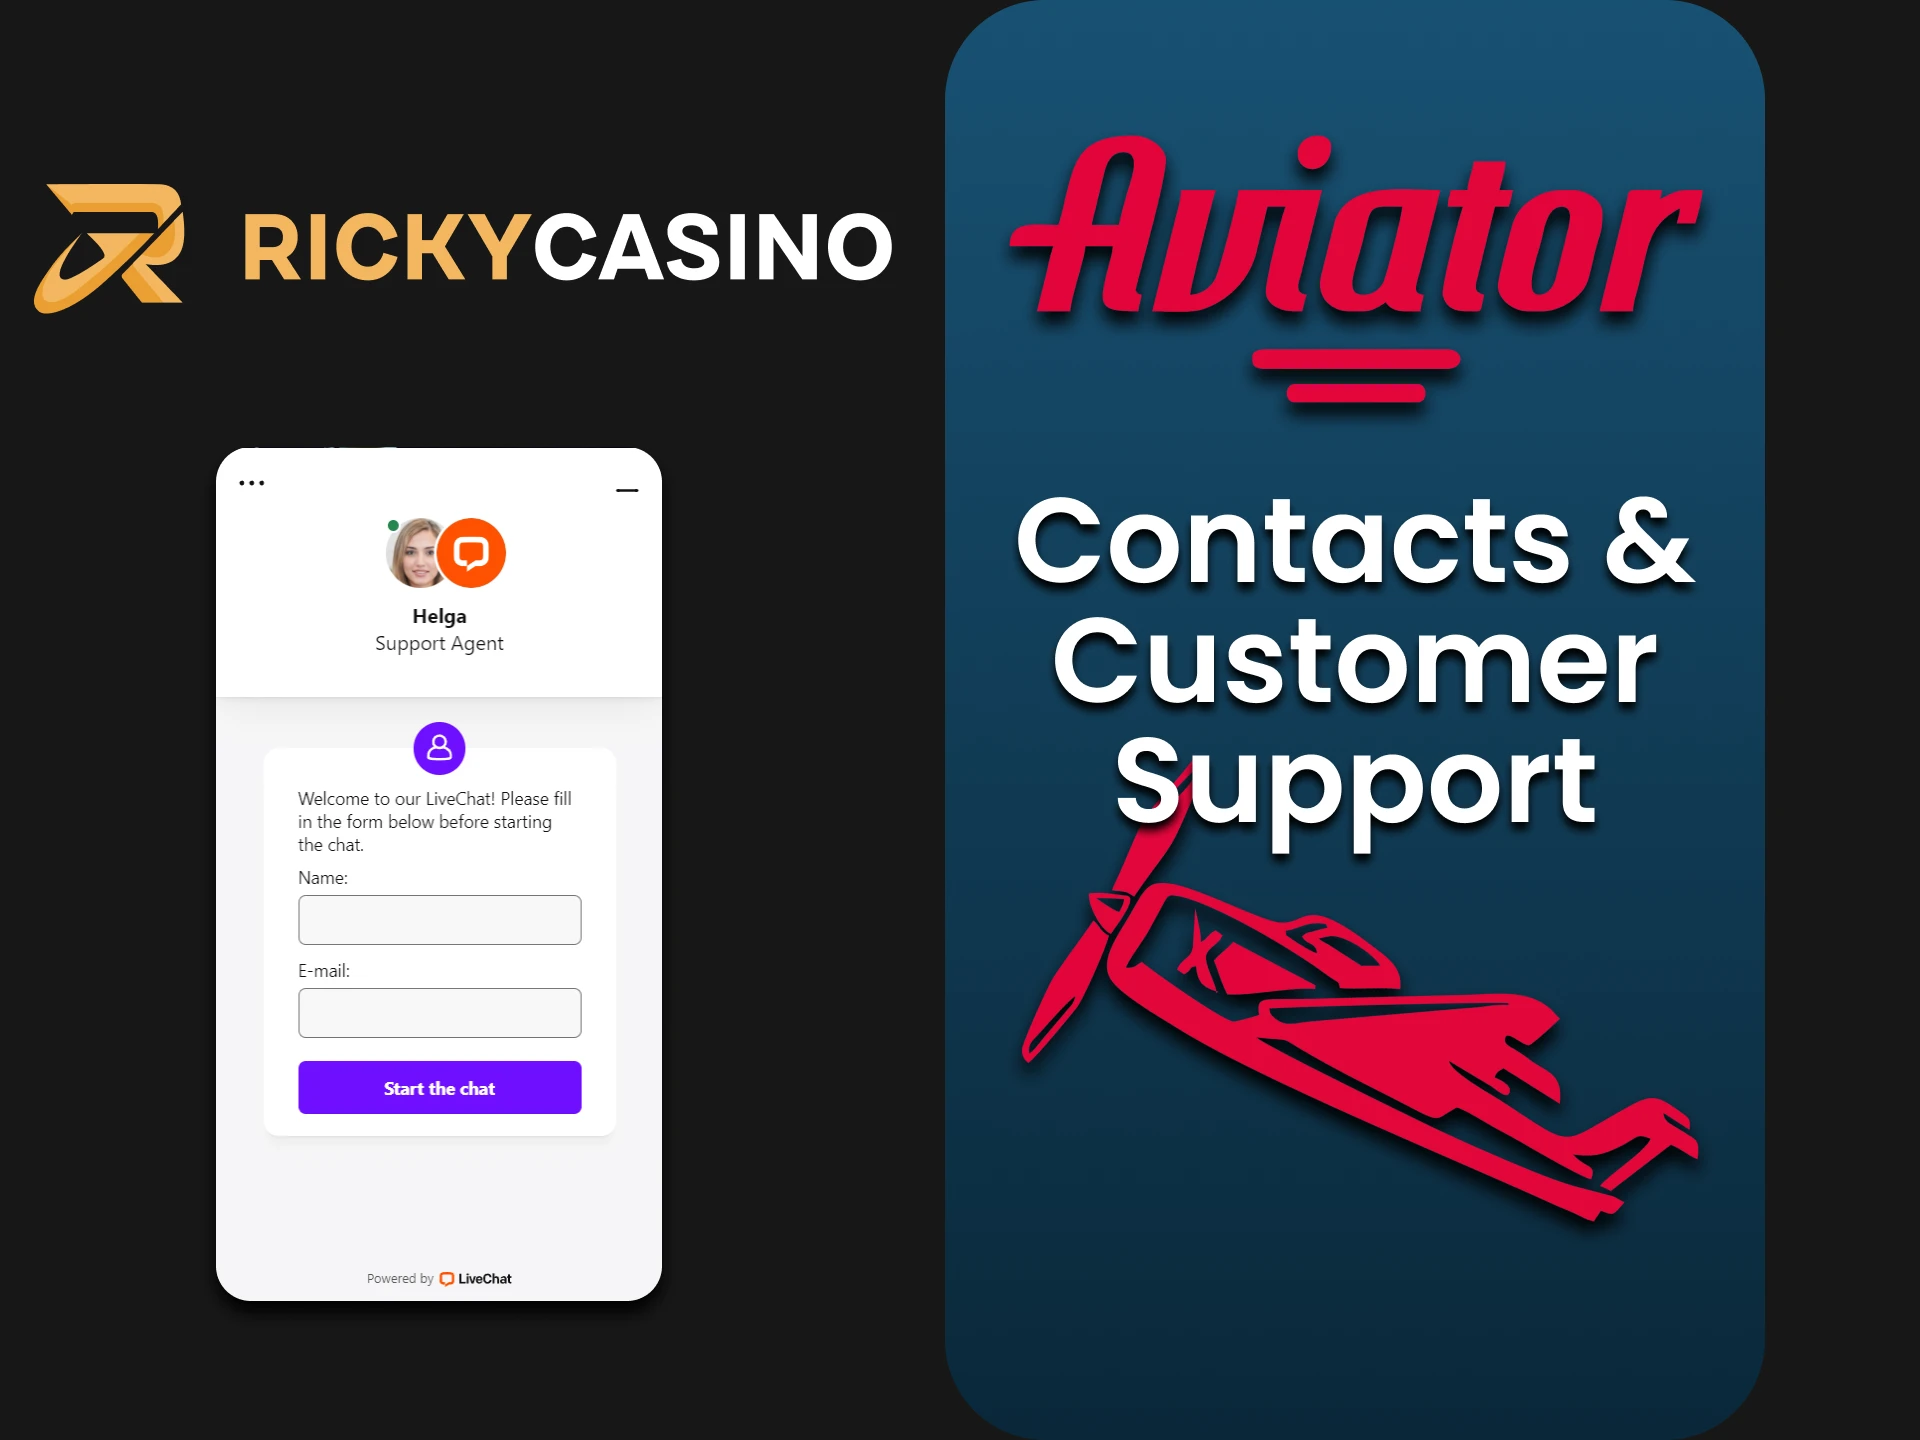 Ricky Casino has live chat.